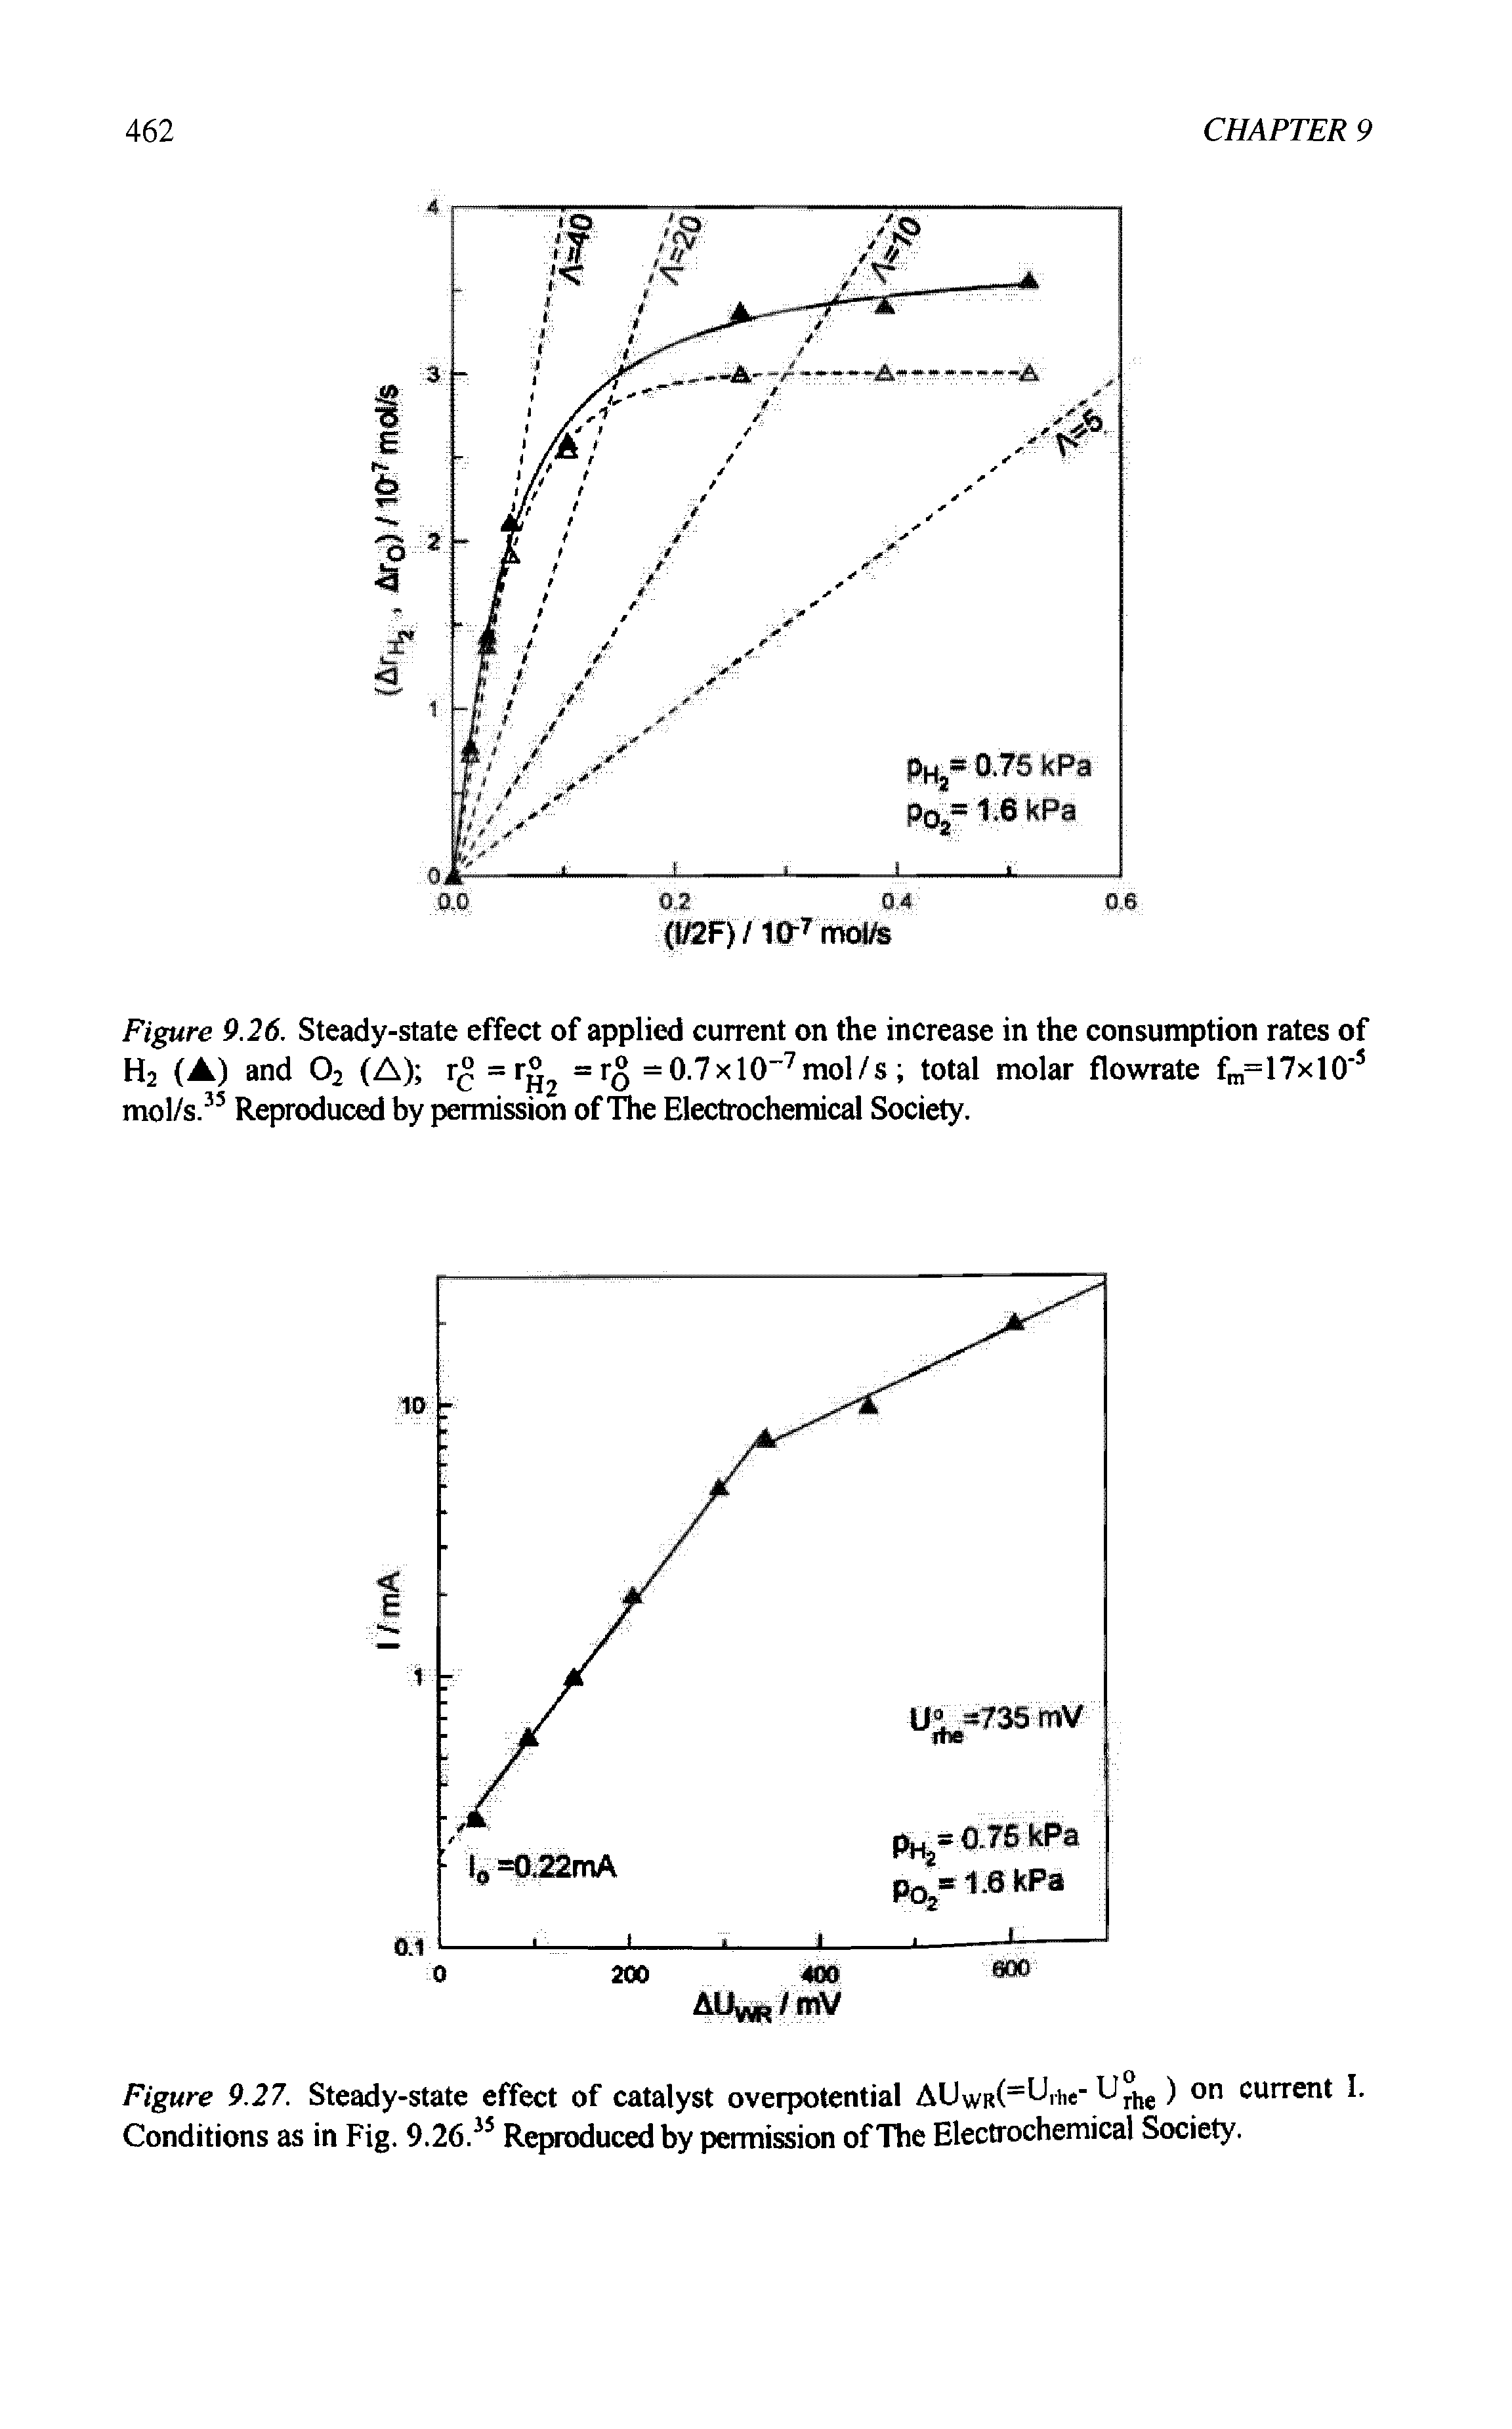 Figure 9.27. Steady-state effect of catalyst overpotential AUwii( riie-U he) on current I. Conditions as in Fig. 9.26.35 Reproduced by permission of The Electrochemical Society.